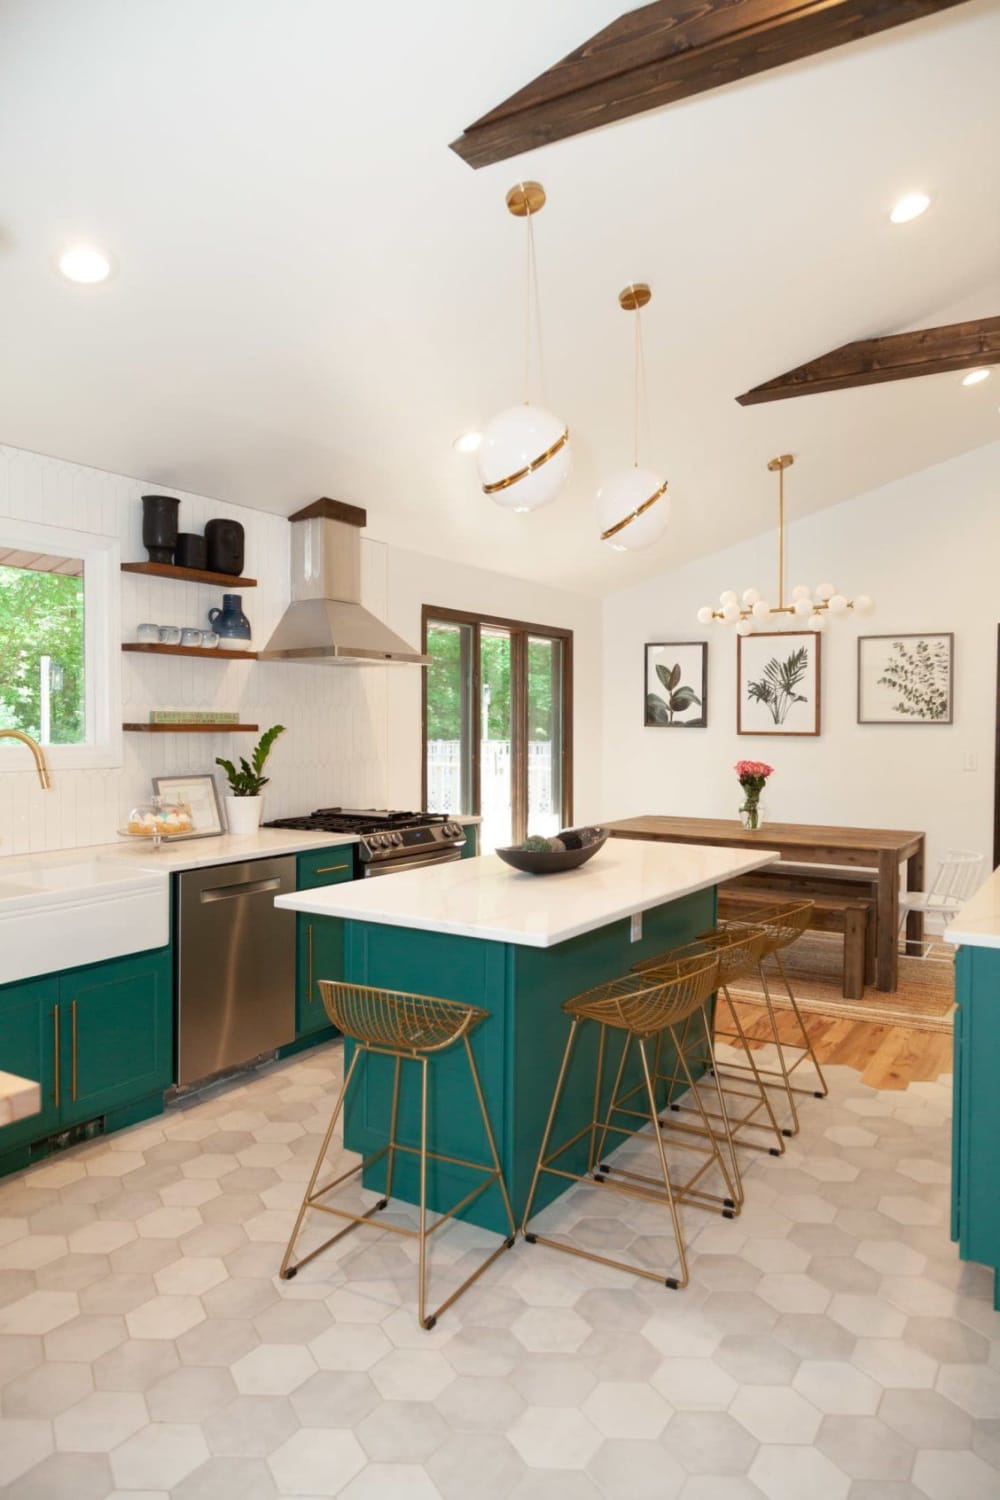 This Woodstock House Has Bricked Archways and Gorgeous Green Cabinets